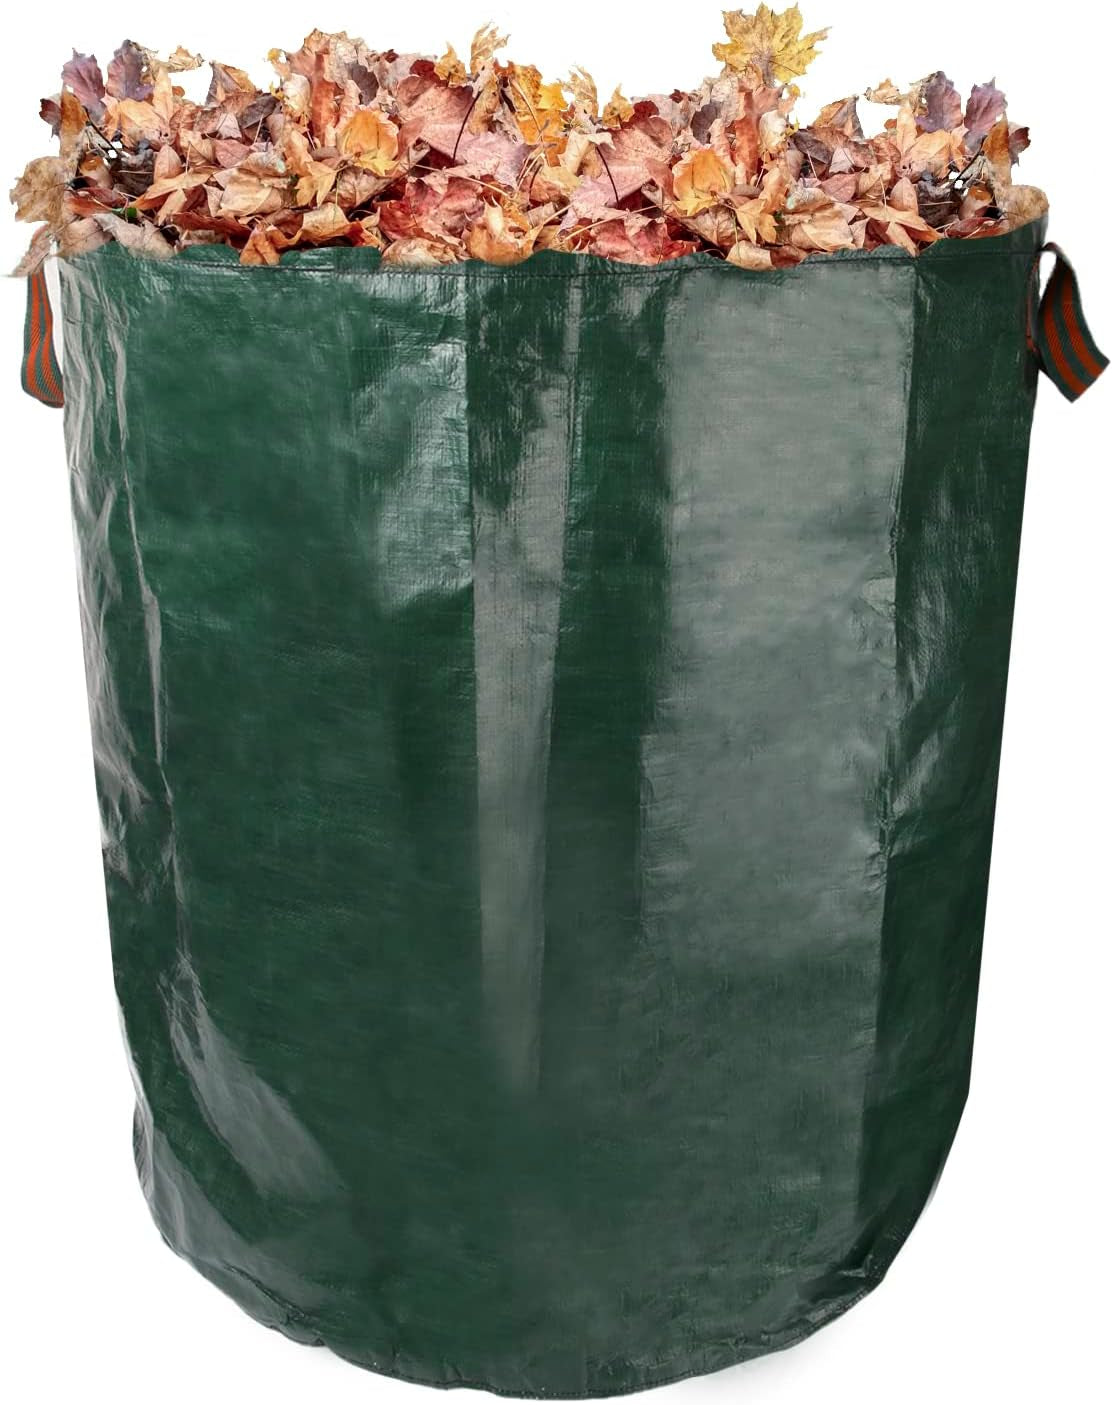 Garden Waste Bag - Heavy Duty Reusable Yard Waste Bags for Leaves, Grass Clippings, and Yard Debris